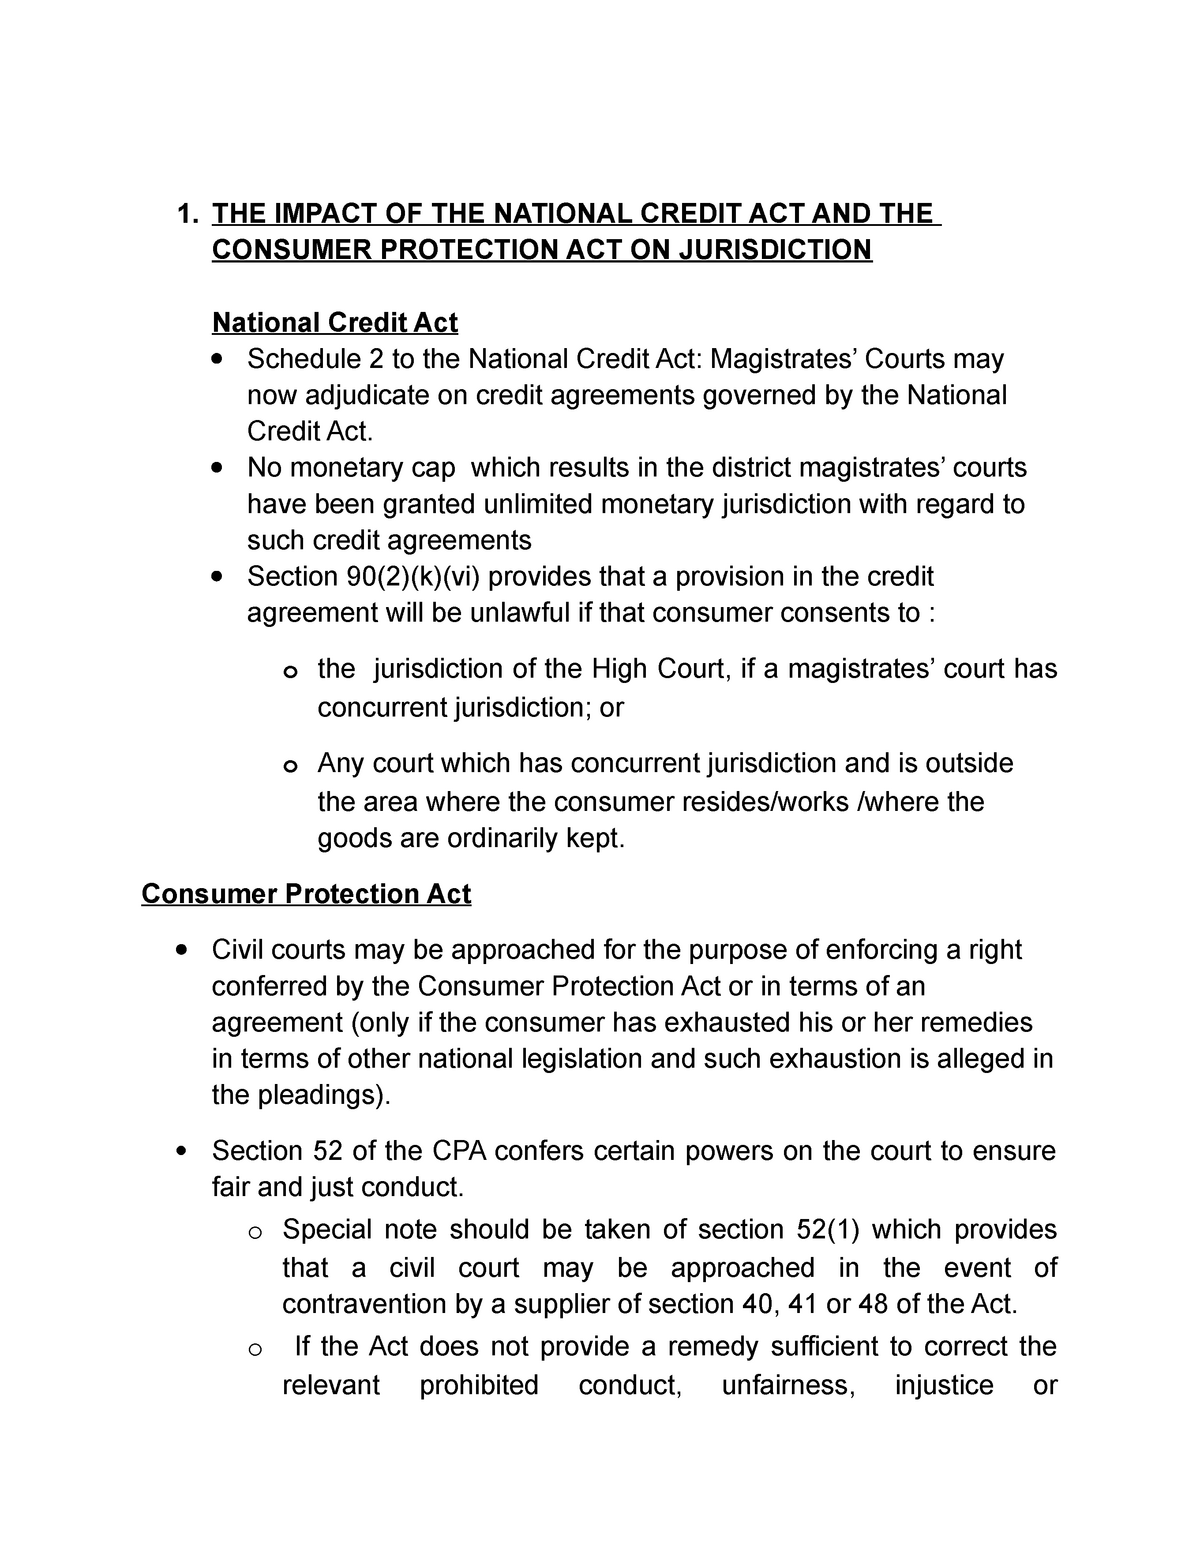 national credit act essay for business studies